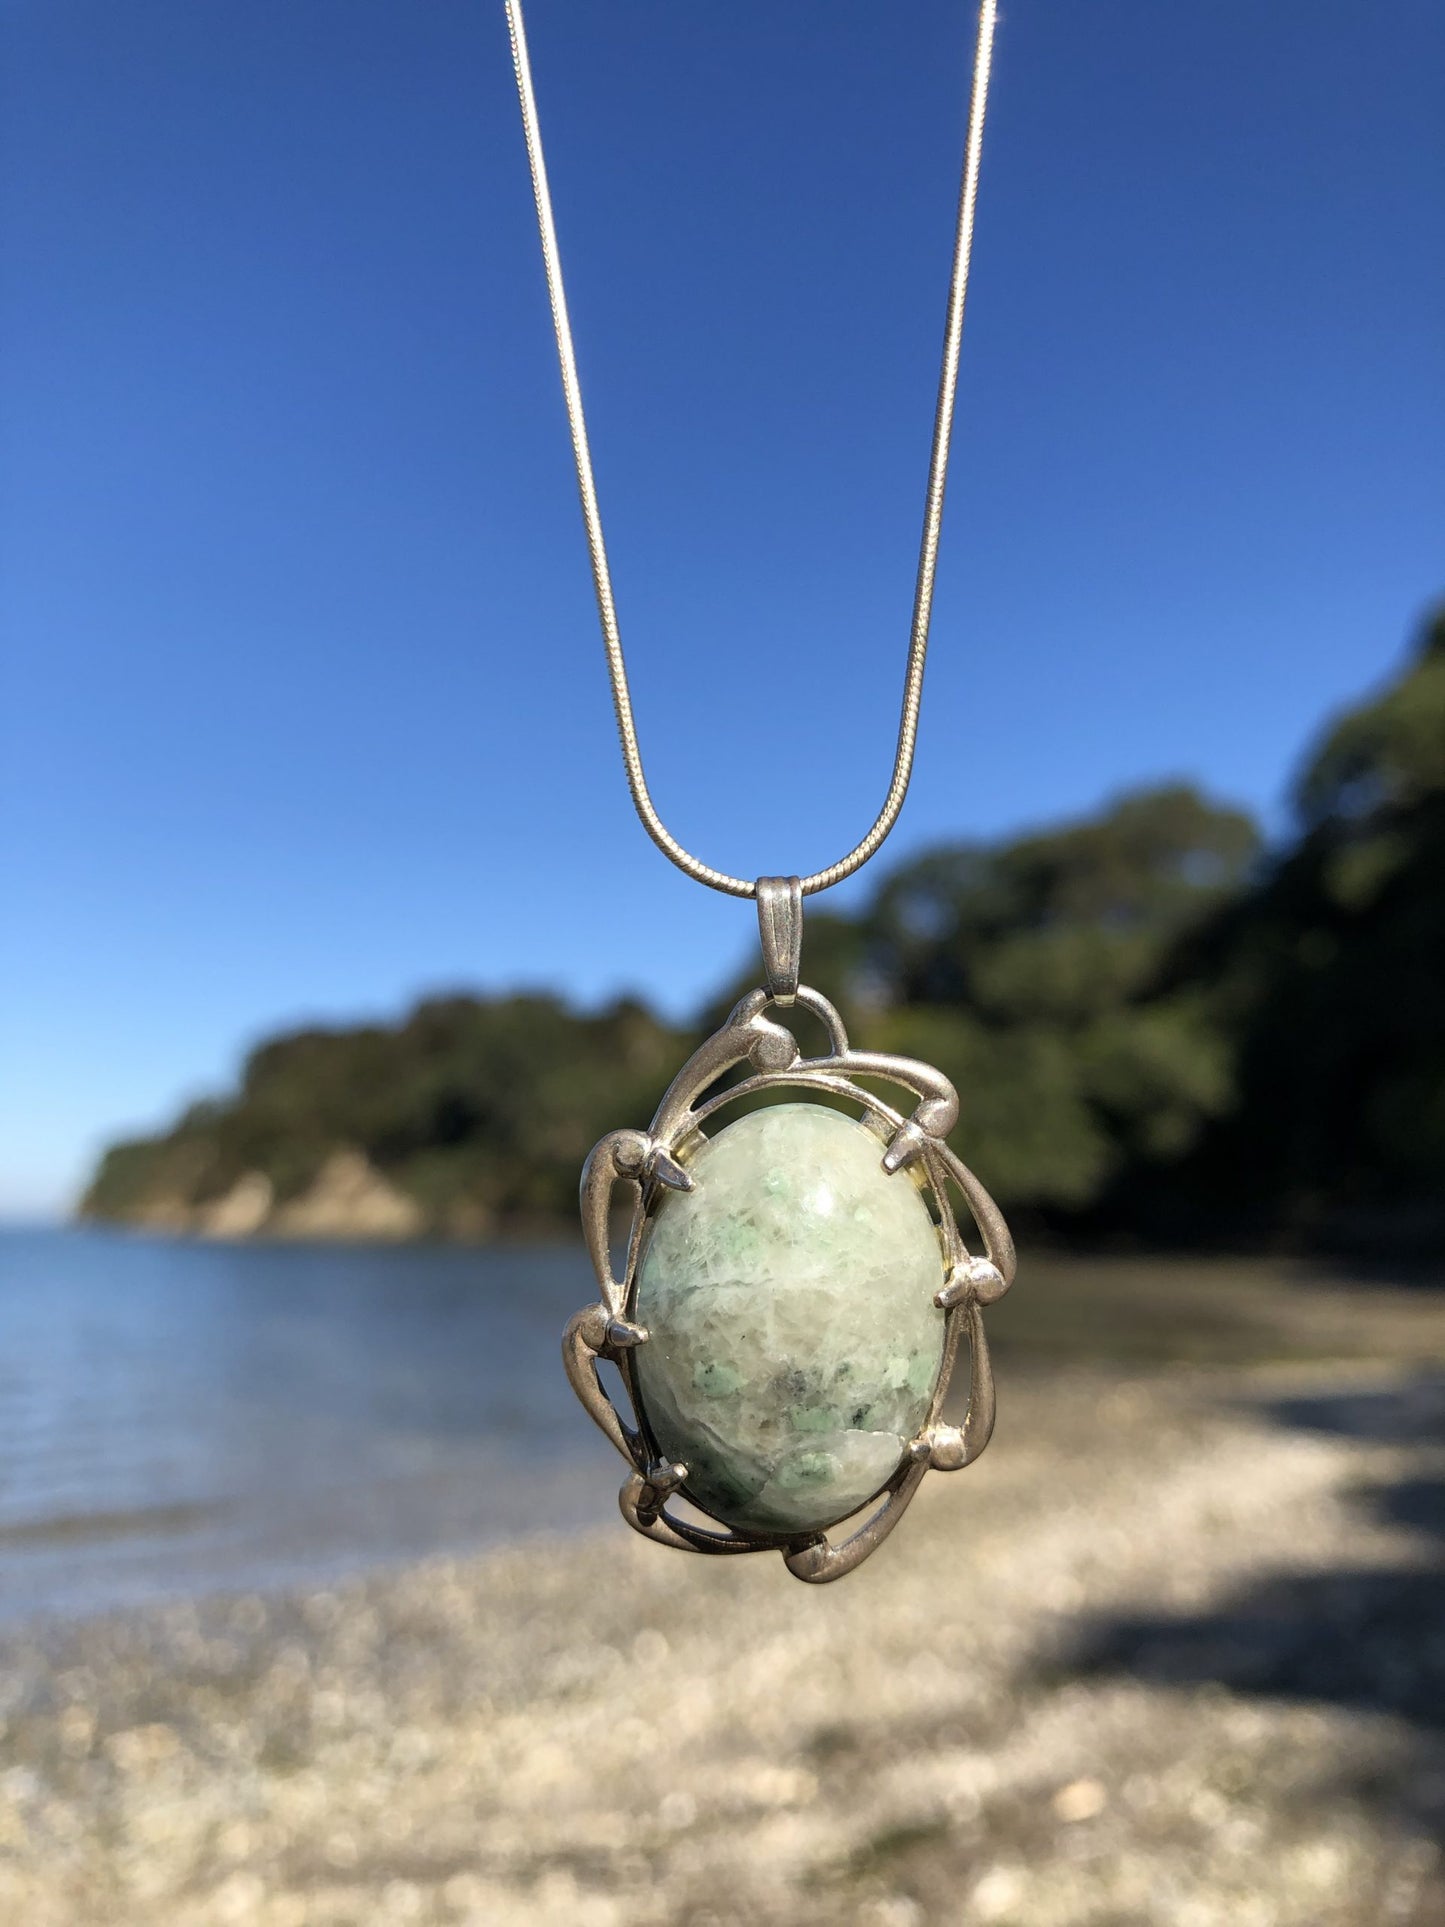 Necklace with New Zealand Hydrogrossular garnet green with white patterning from the Polaris River in Nelson and hand polished to a 25x18mm cabochon and set in sterling silver with a 24 inch sterling silver snake chain, on beach